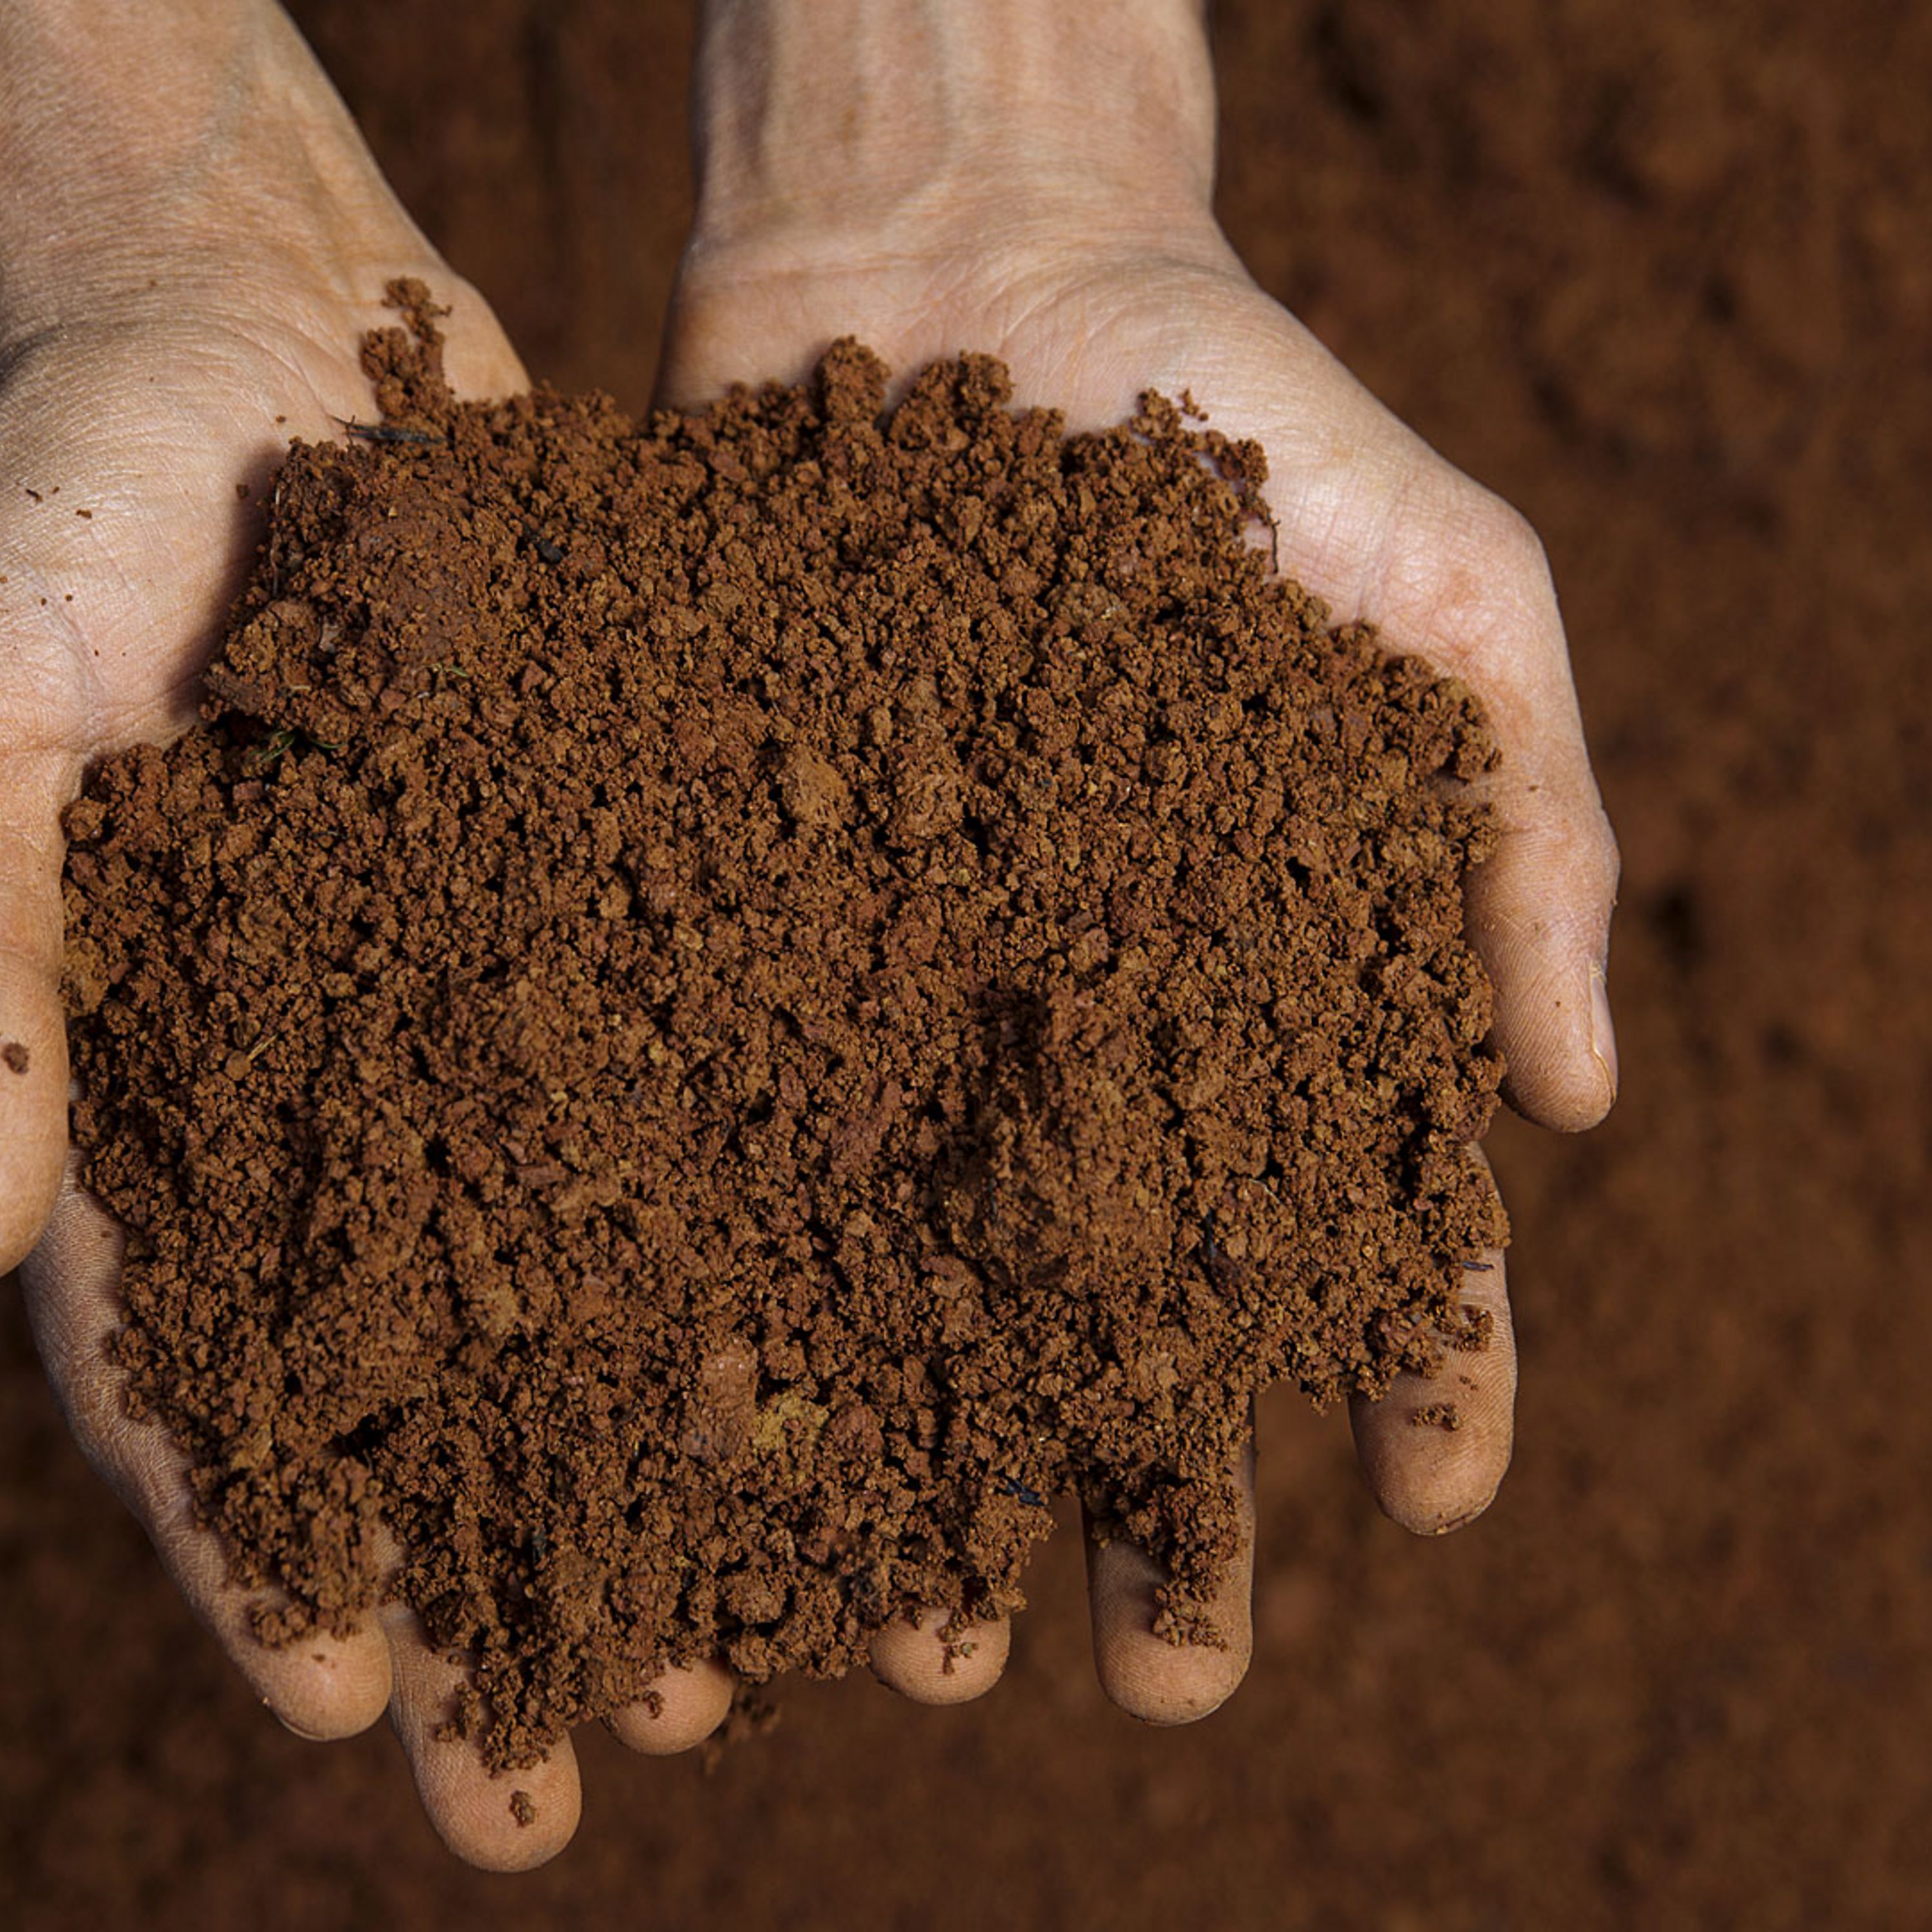 Why do some people eat soil?